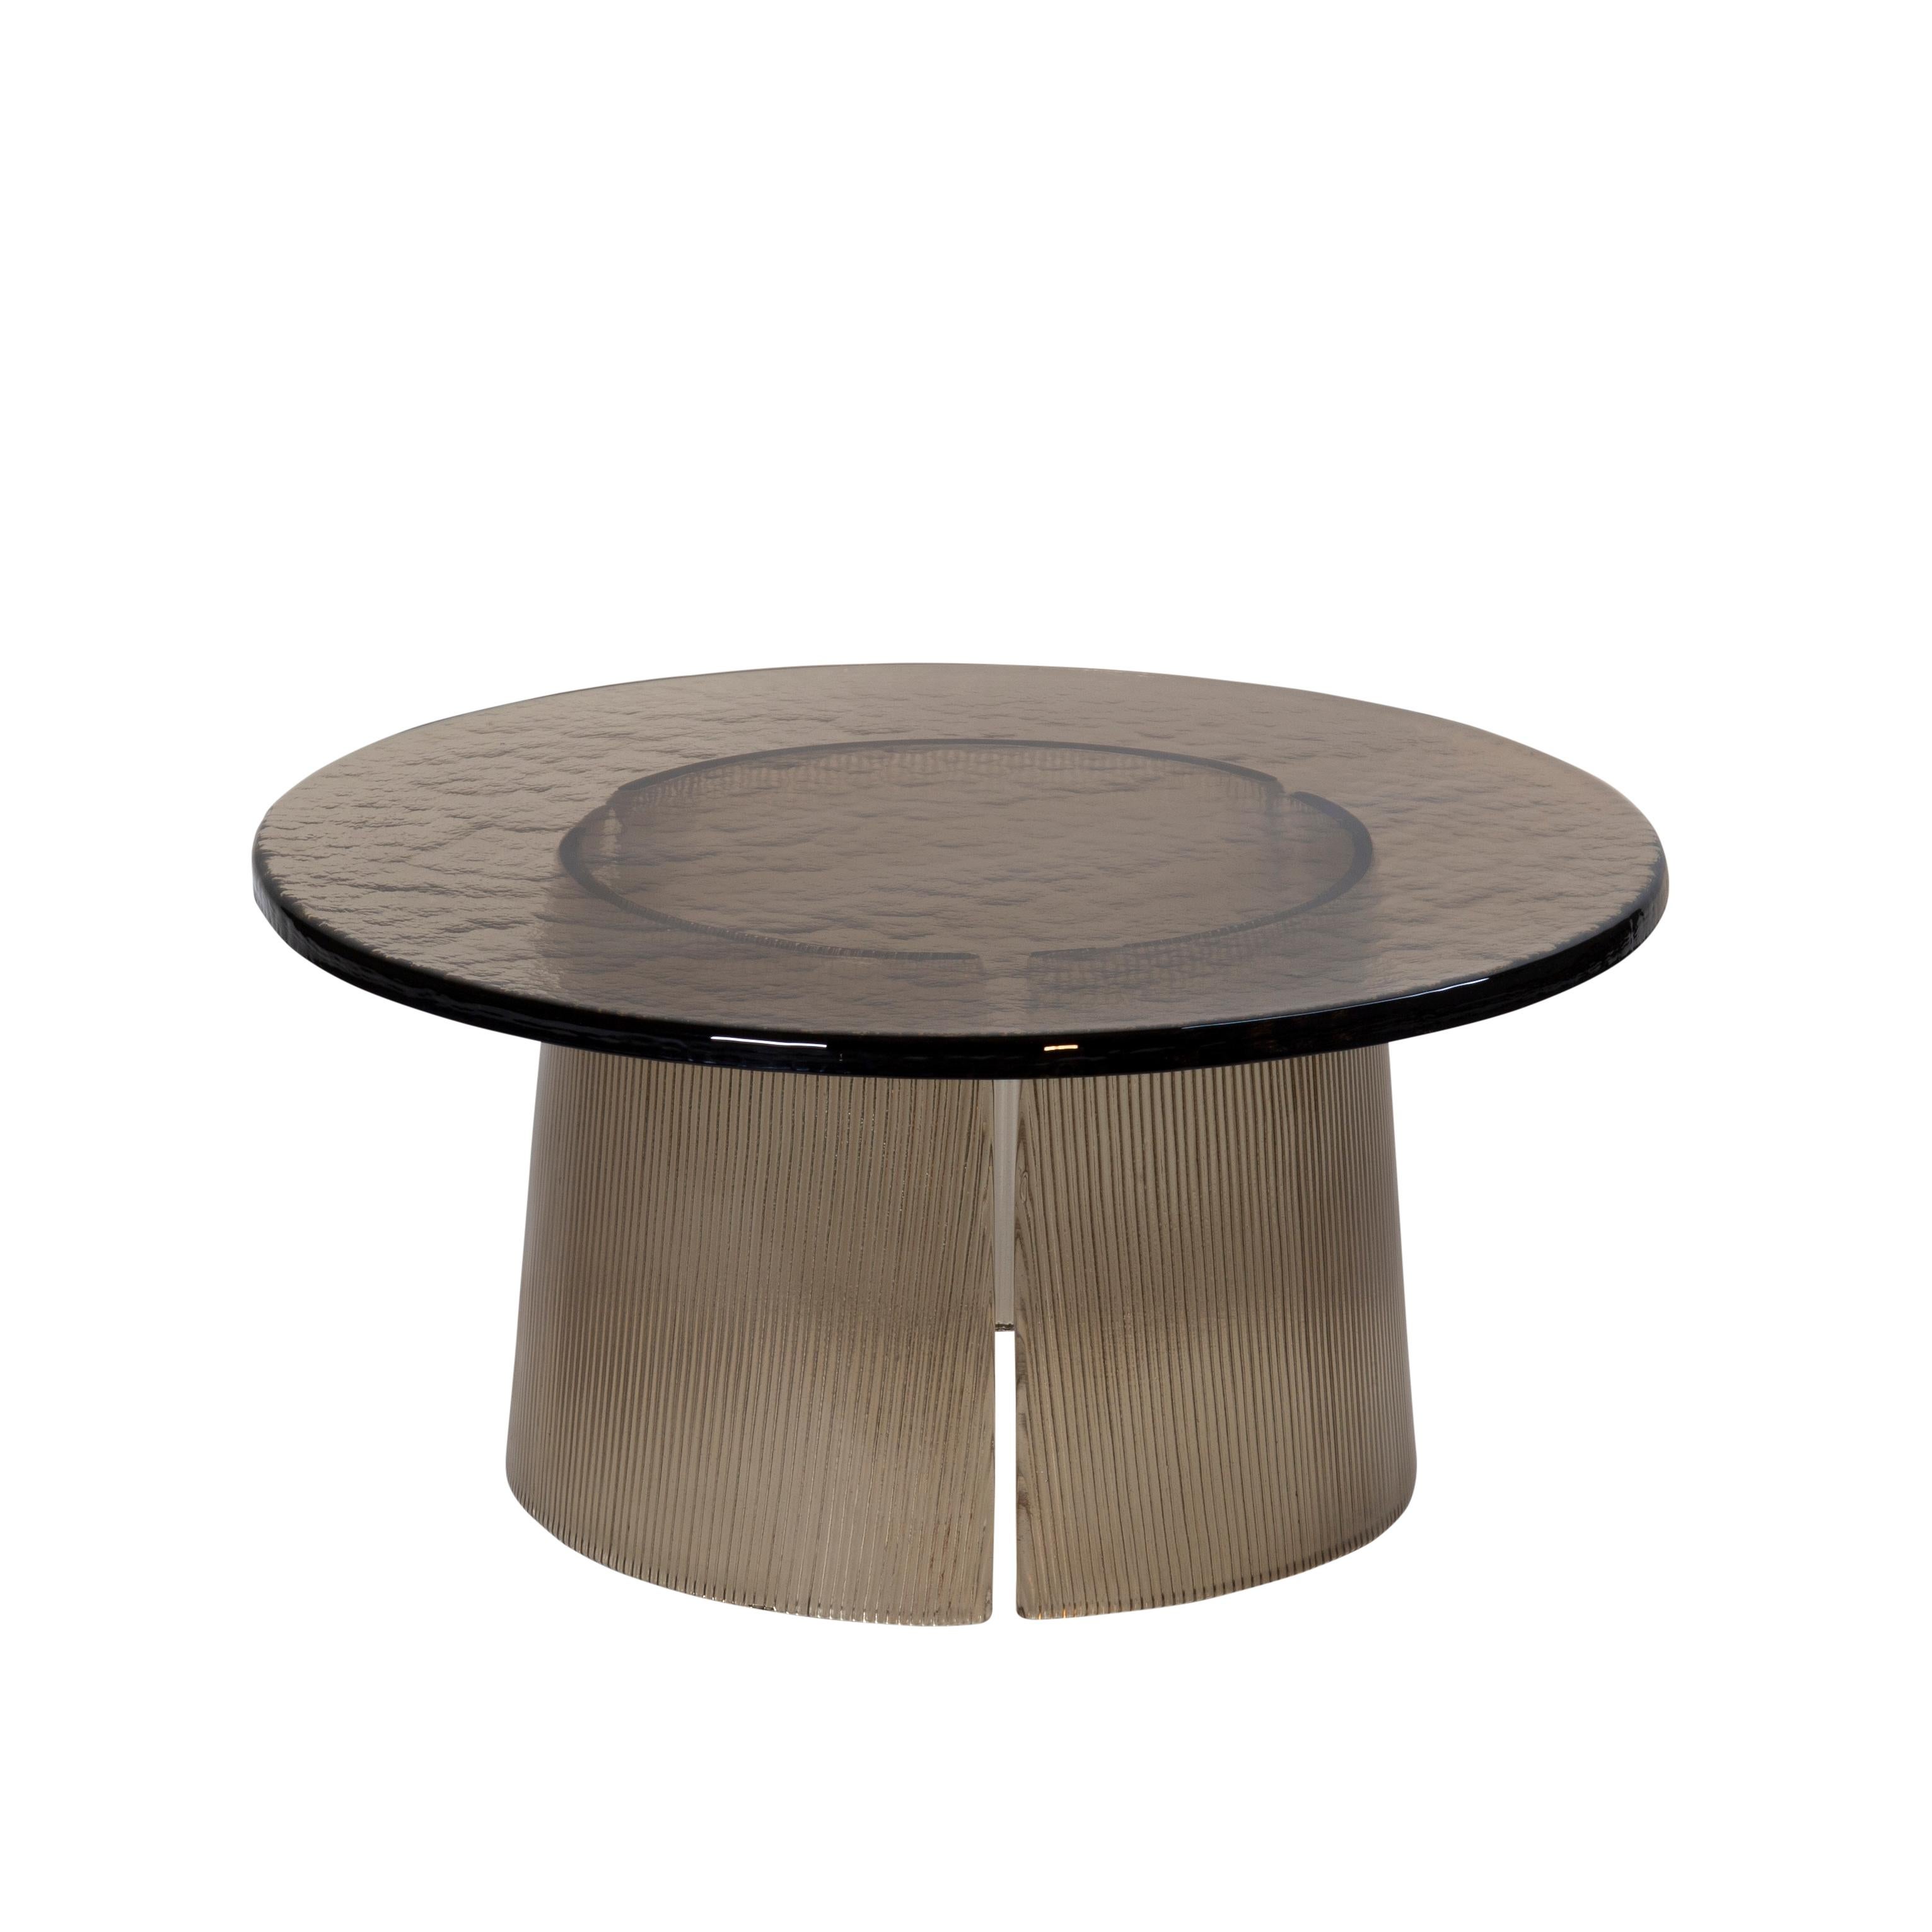 Bent side table big smoky grey by Pulpo
Dimensions: D 75 x H 35 cm
Materials: Casted glass.

Also available in different finishes and dimensions.

The bubbled surface of the cast glass table top dances against with the smooth lines of the